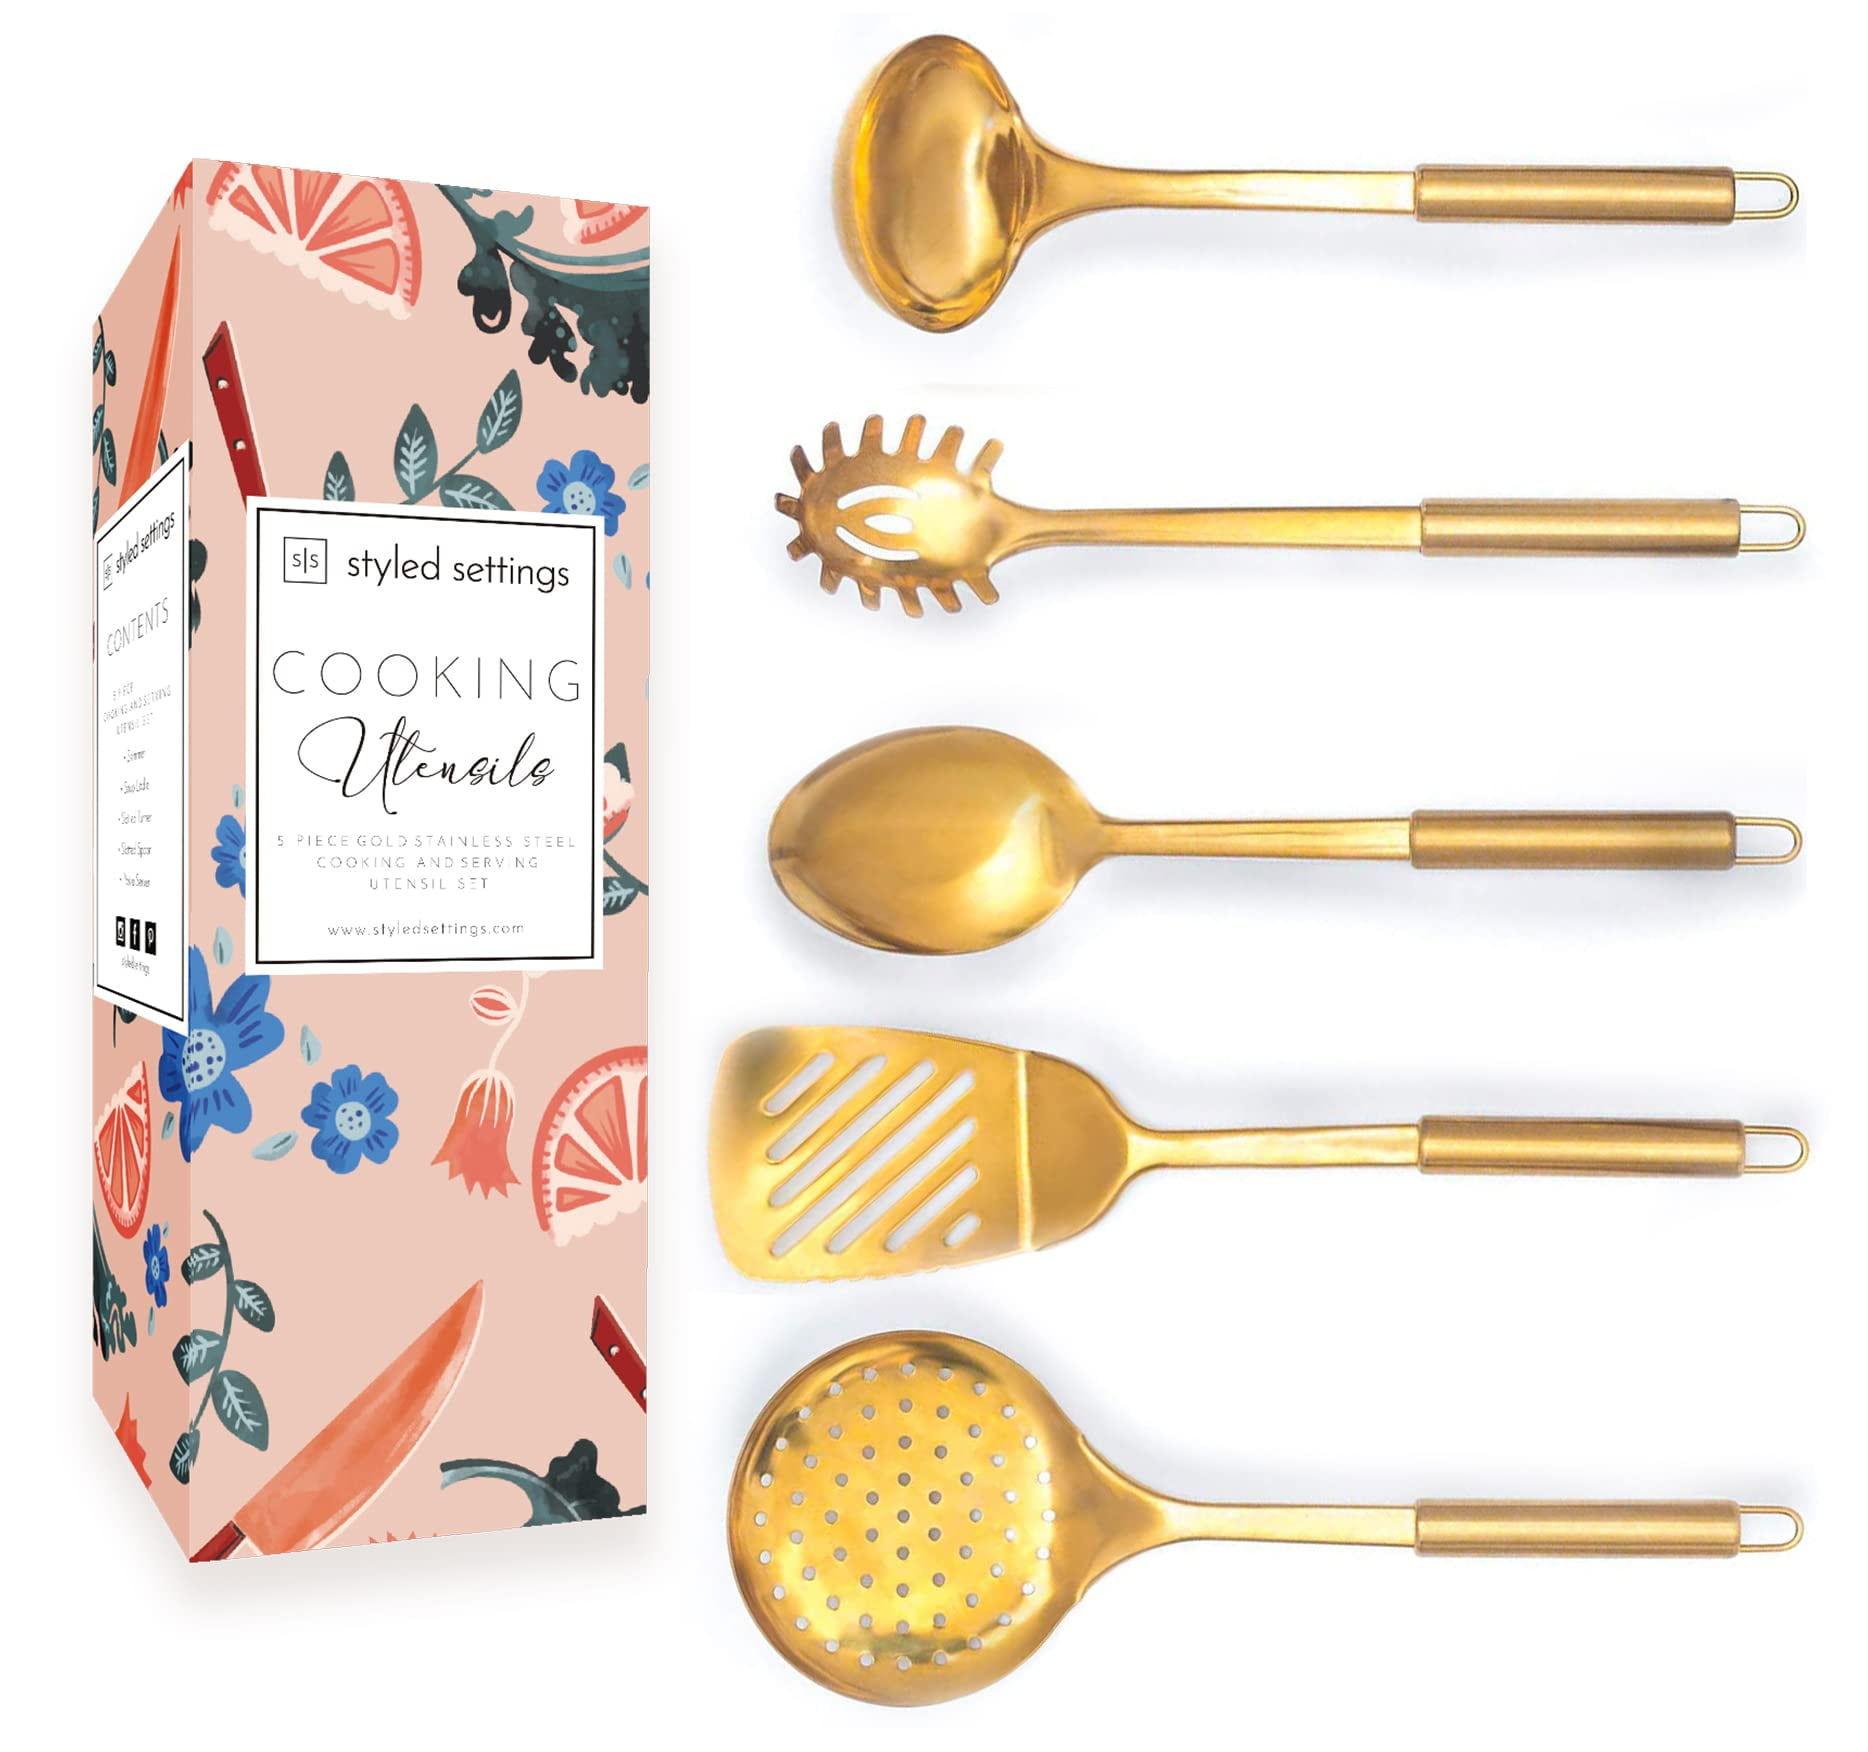 Kitchen Cooking Utensils Gold Metal Slotted Spaghetti Spoon Turner Masher Ladle 